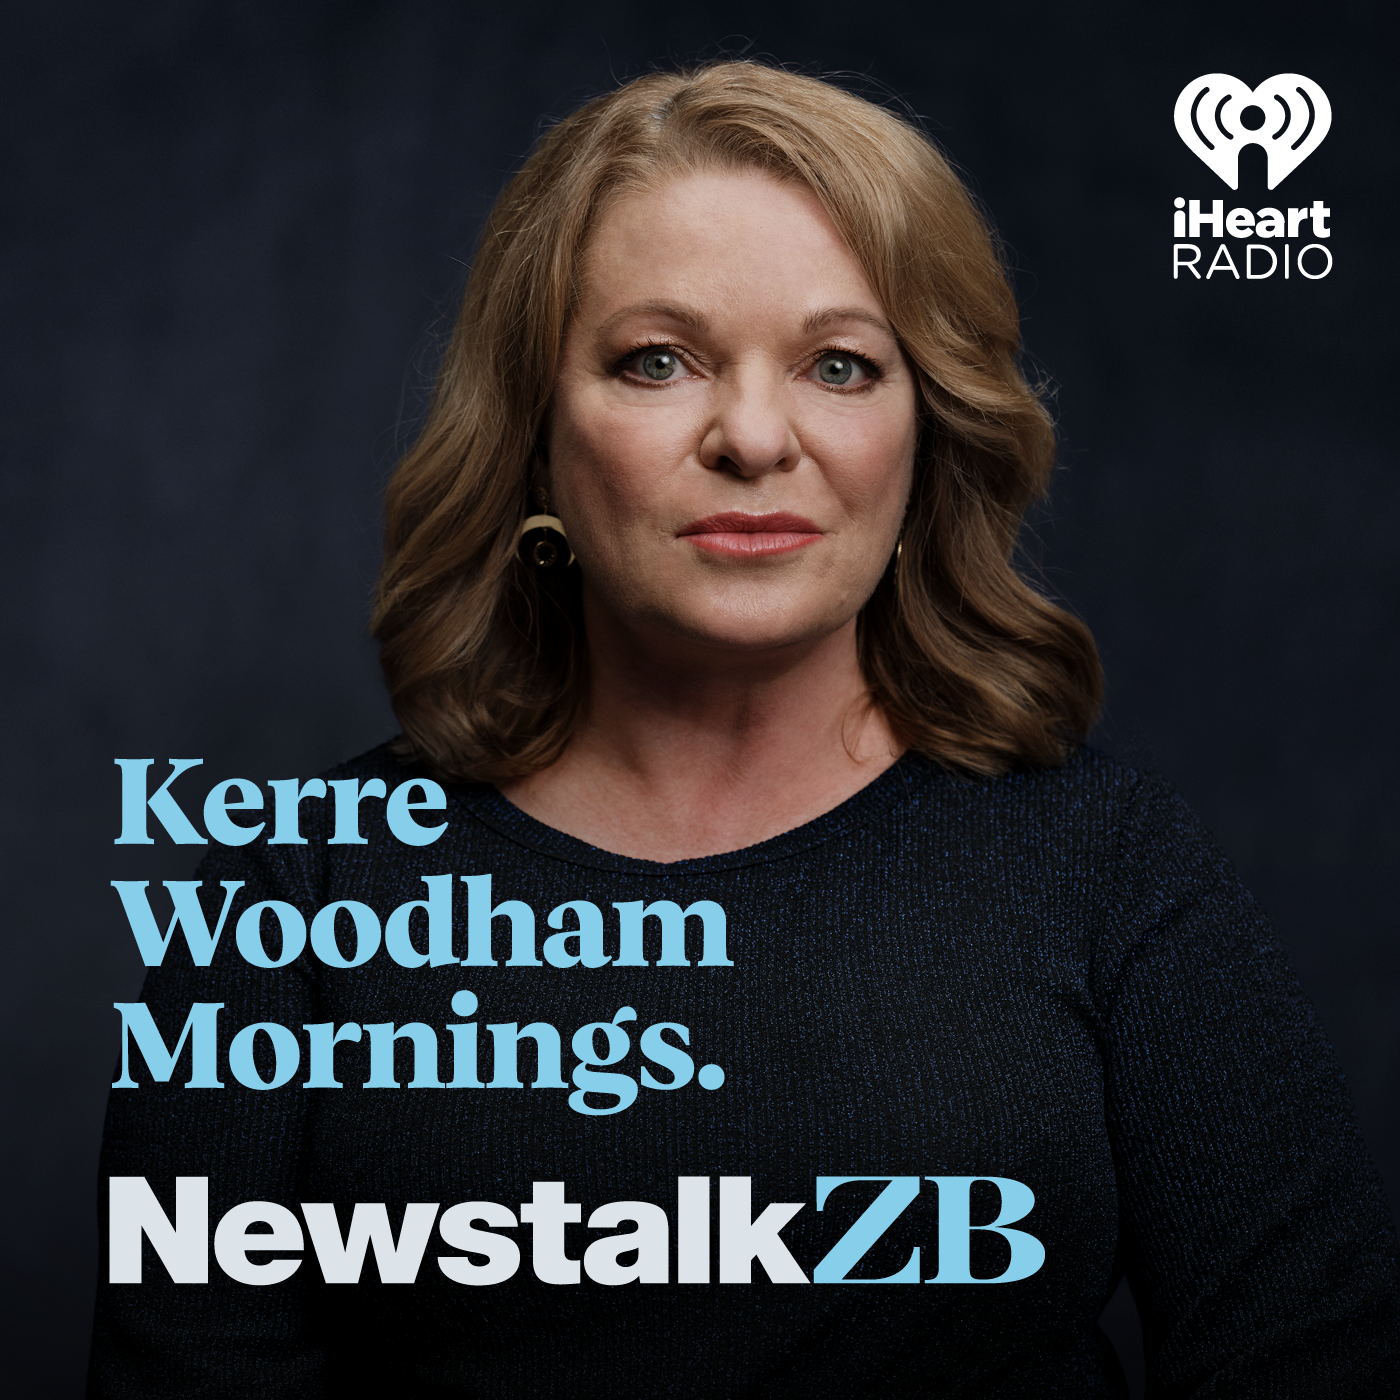 Kerre Woodham: Beggars used to be part of the community, what changed?